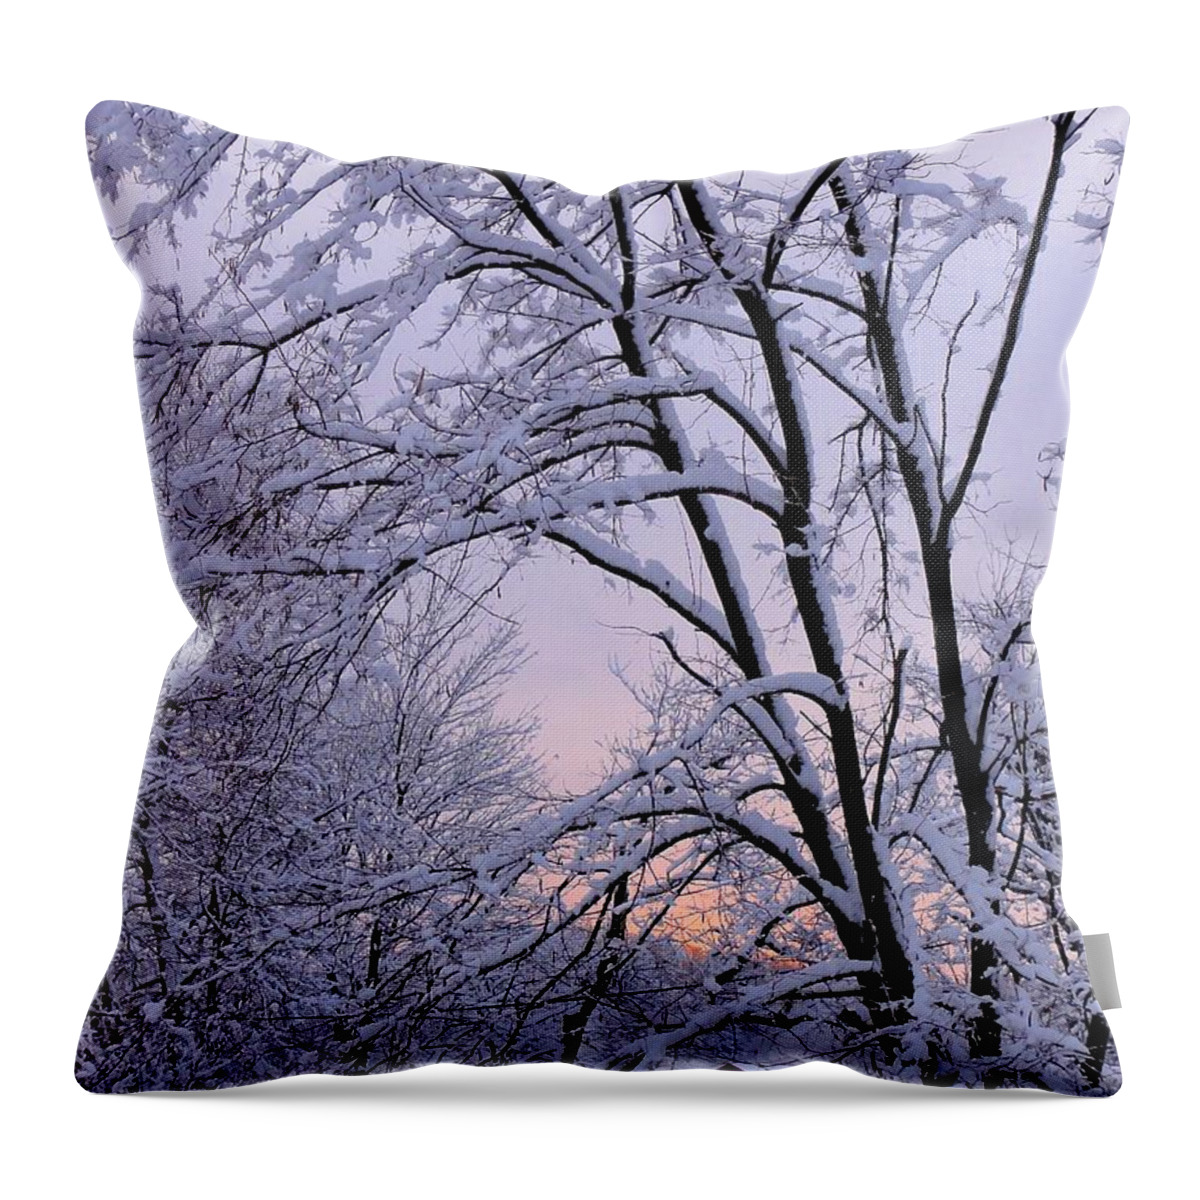 Bucks County Playhouse Throw Pillow featuring the photograph Playhouse Through Snow by Christopher Plummer